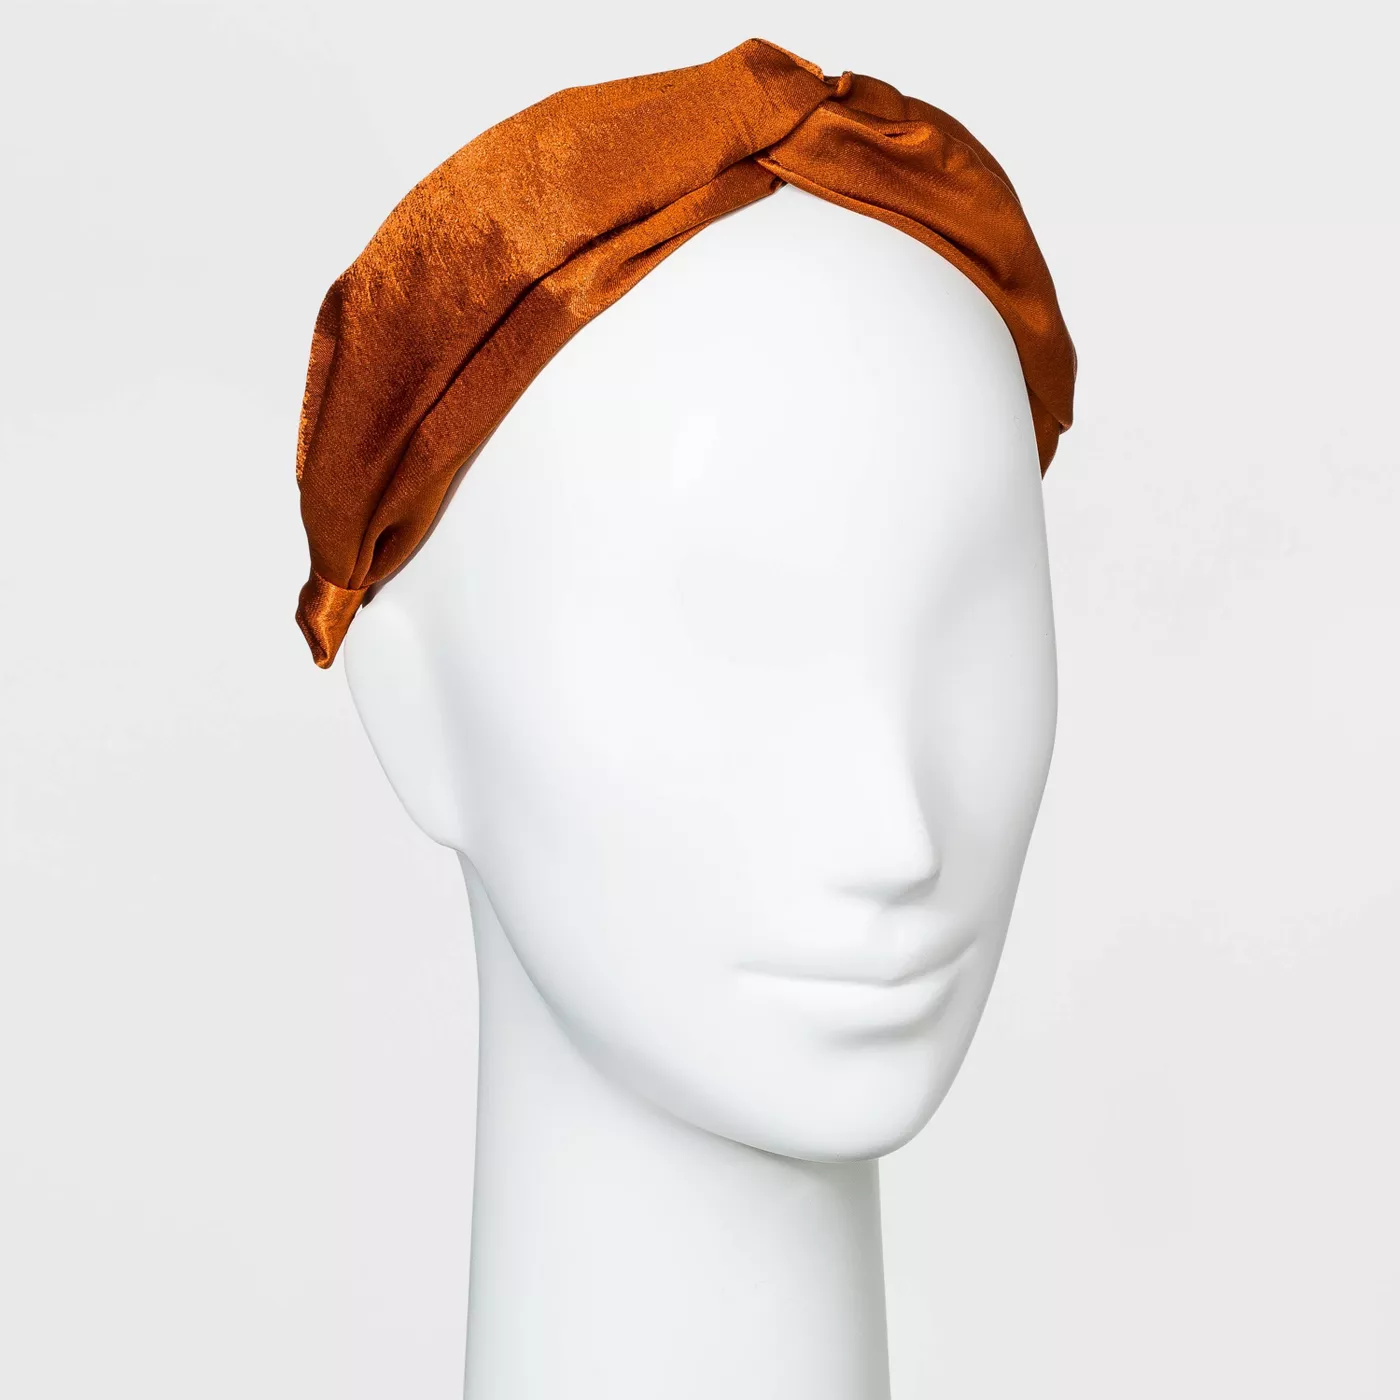 Satin Textured with Twist Headband - A New Day™ - image 1 of 2